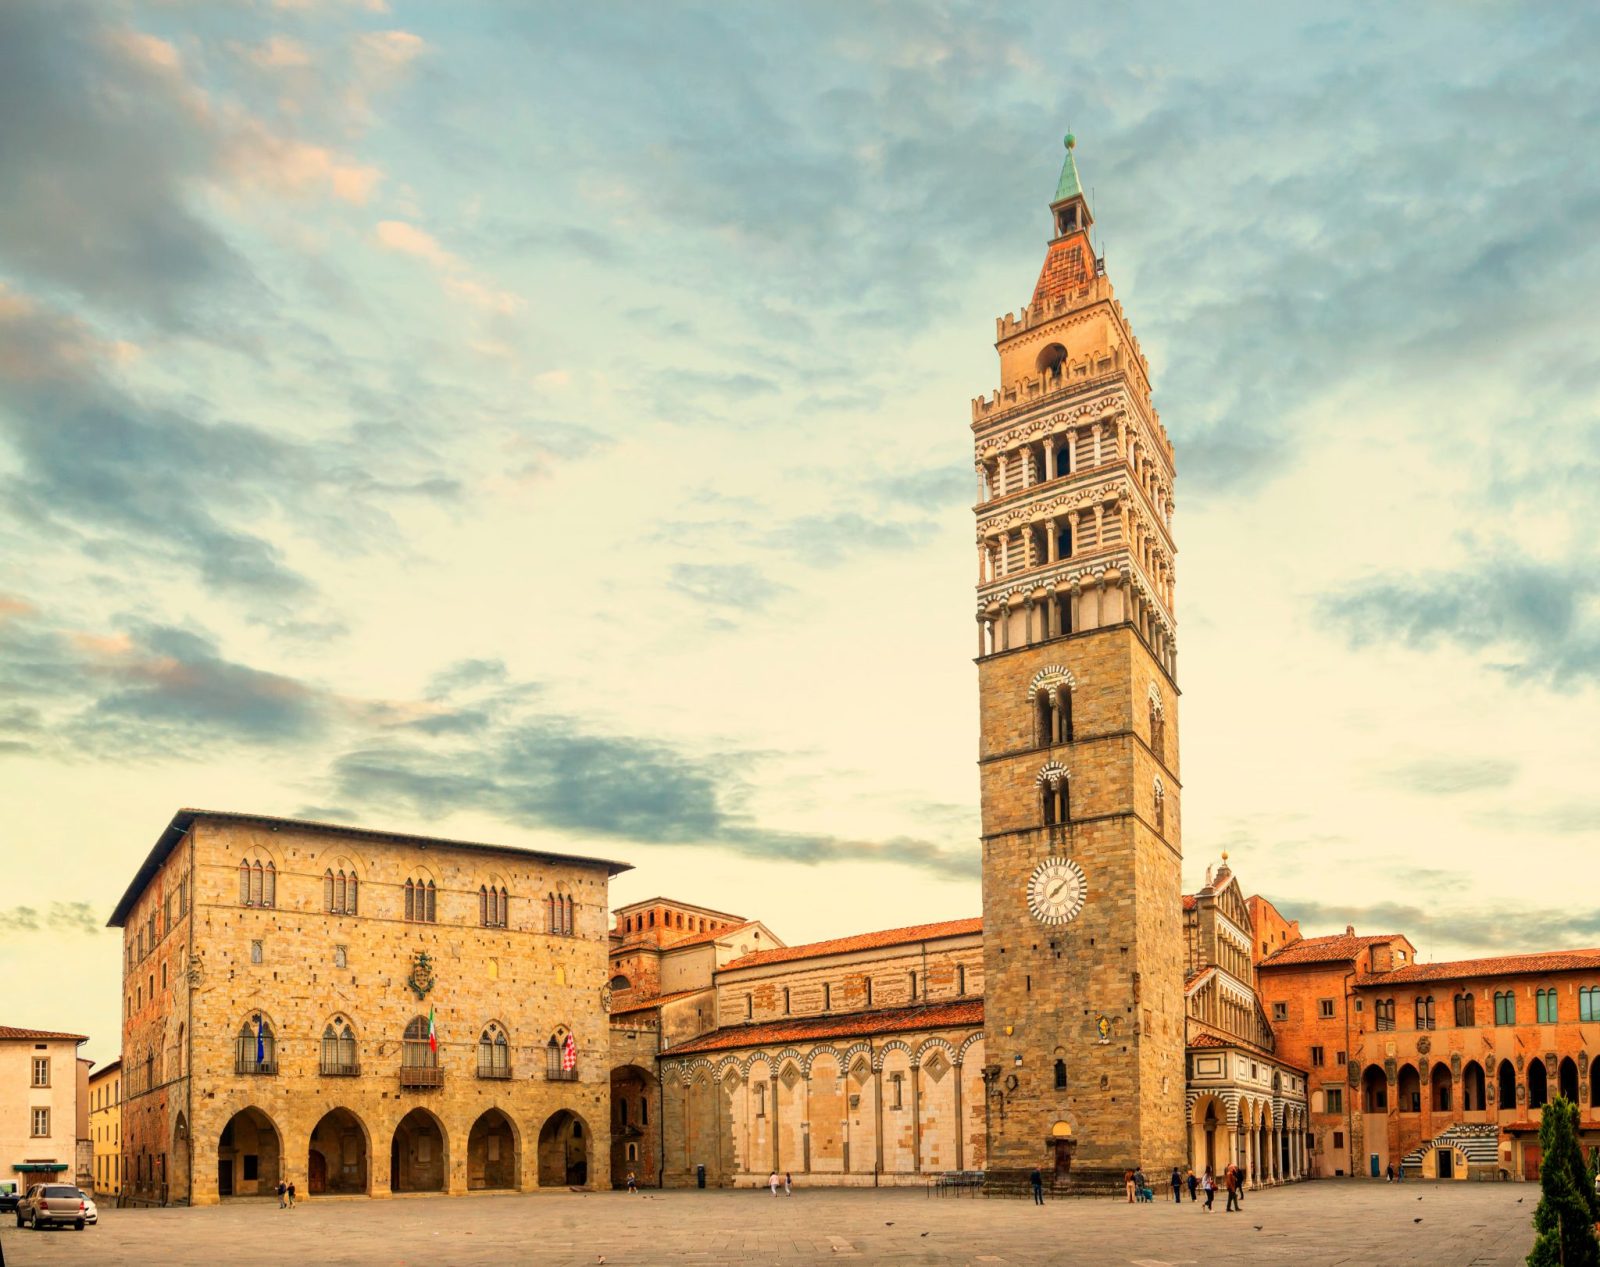 Piazza,Del,Duomo,Square,With,Old,Town,Hall,And,Cathedral